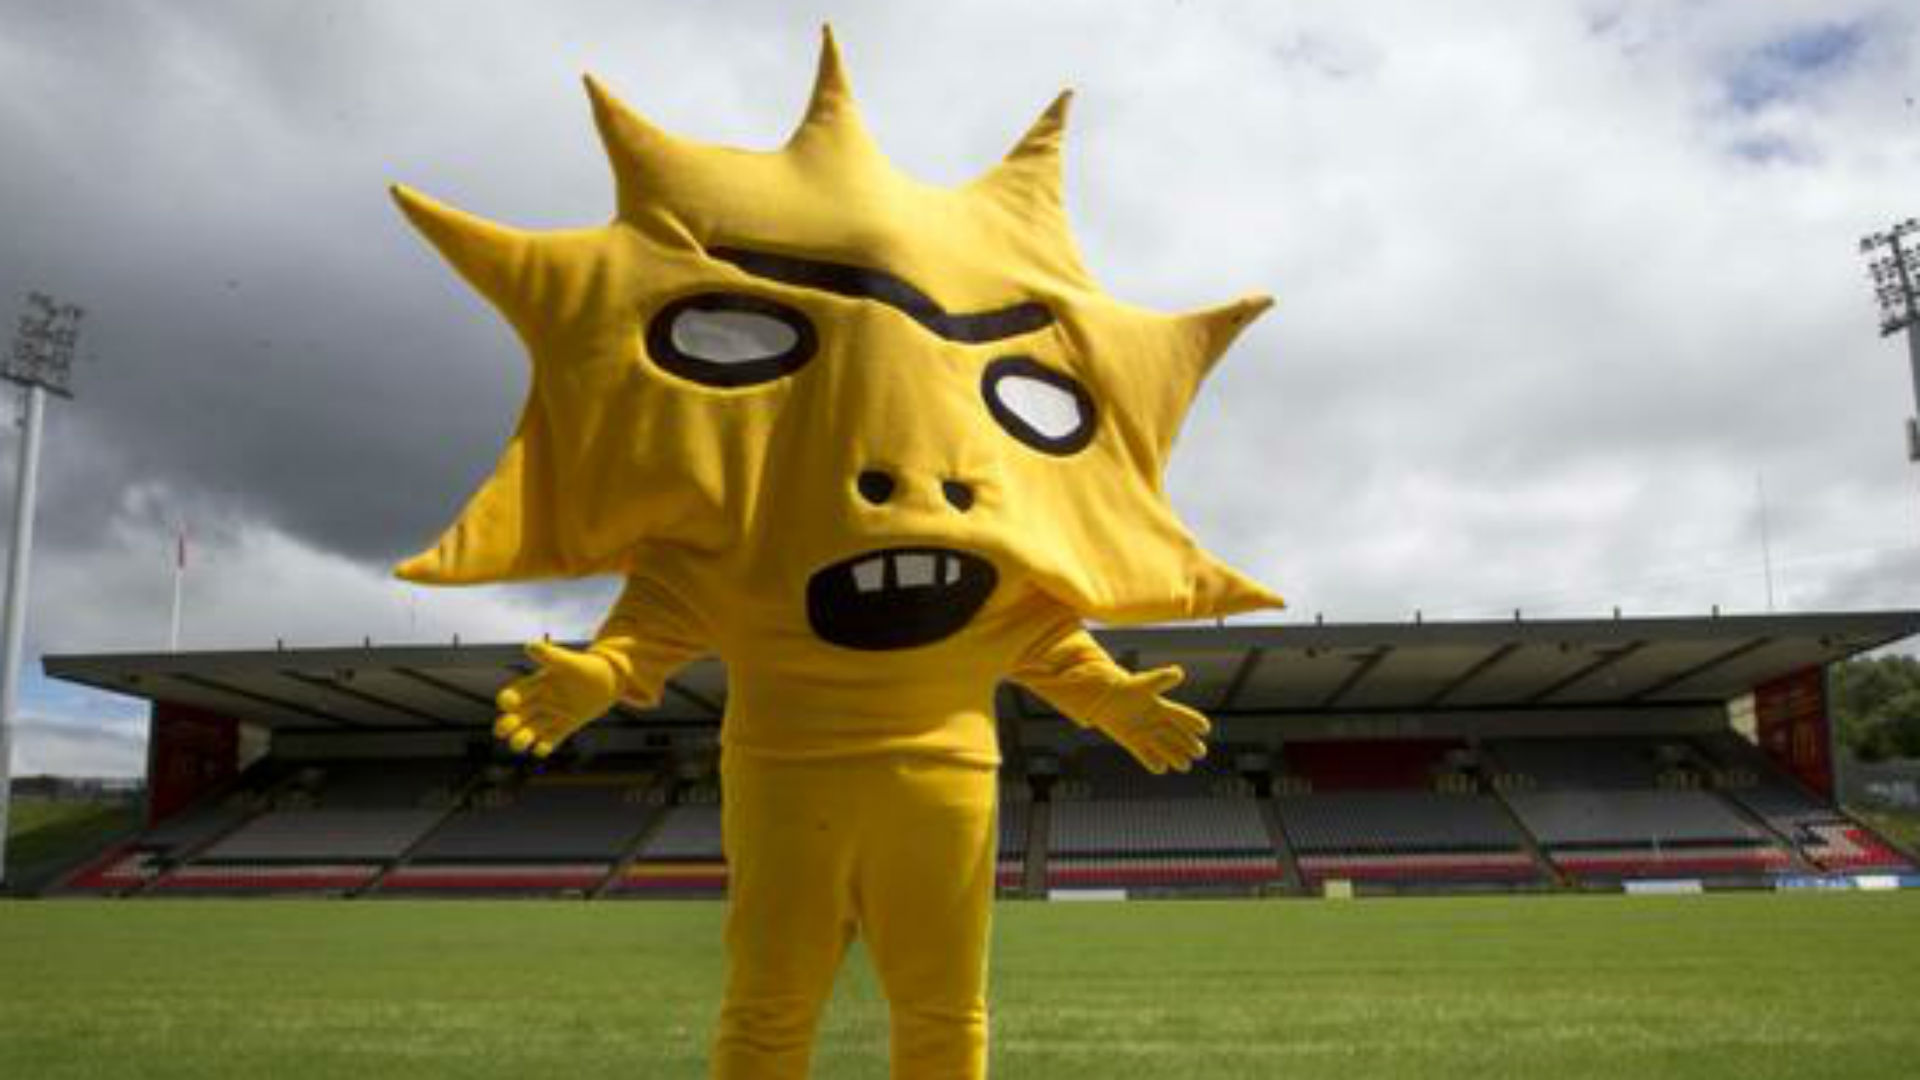 Partick Thistle F.C.'s new mascot will leave you confused | Soccer